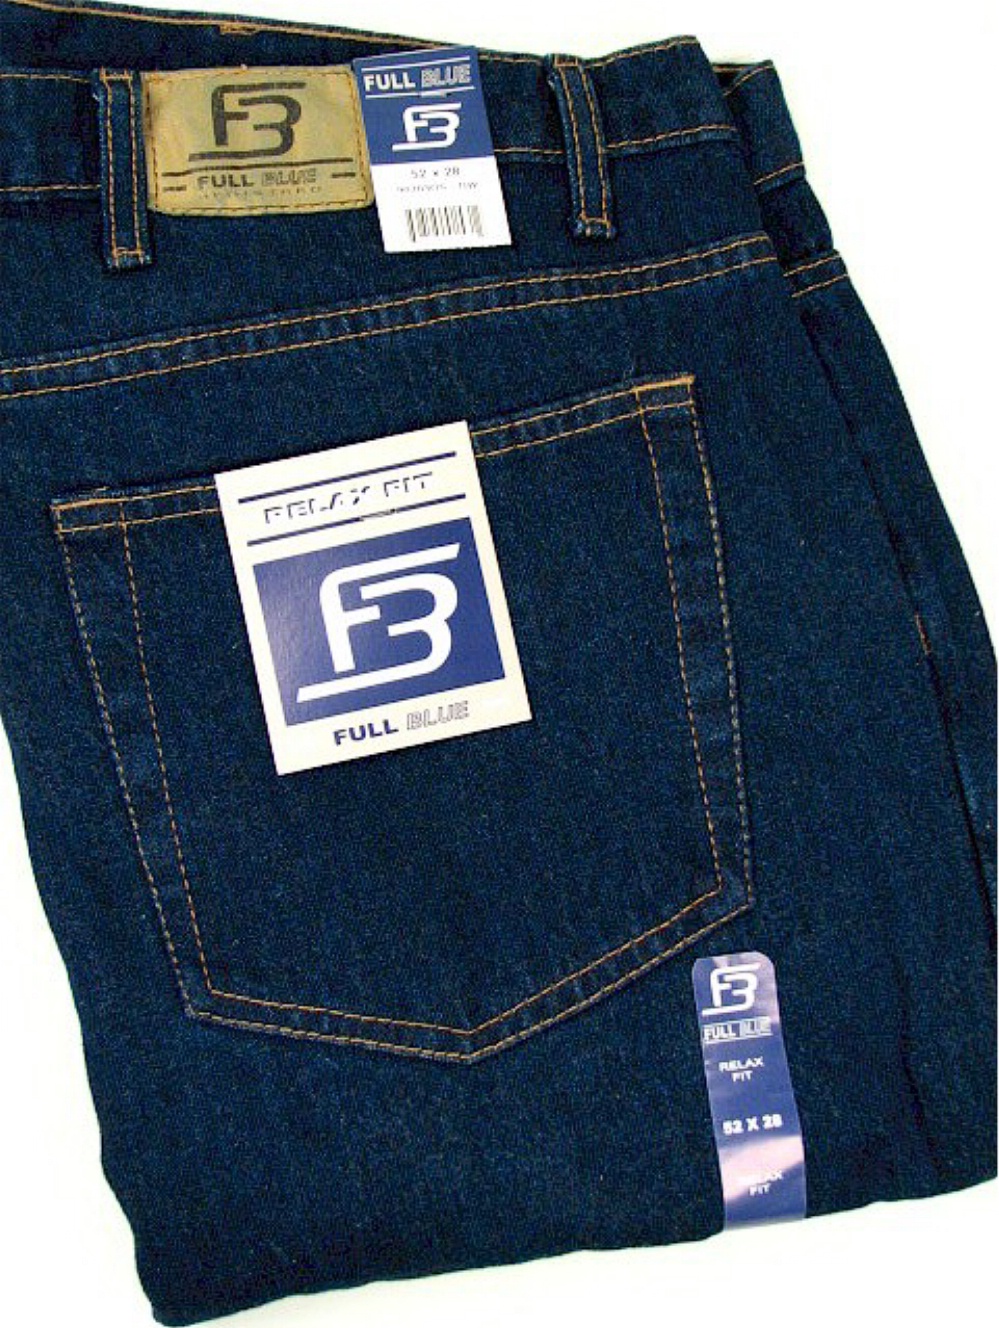 Full Blue Big and Tall  90203OS-Y Relaxed 5 Pocket Denim Jean NAVY 62-30 - image 1 of 2